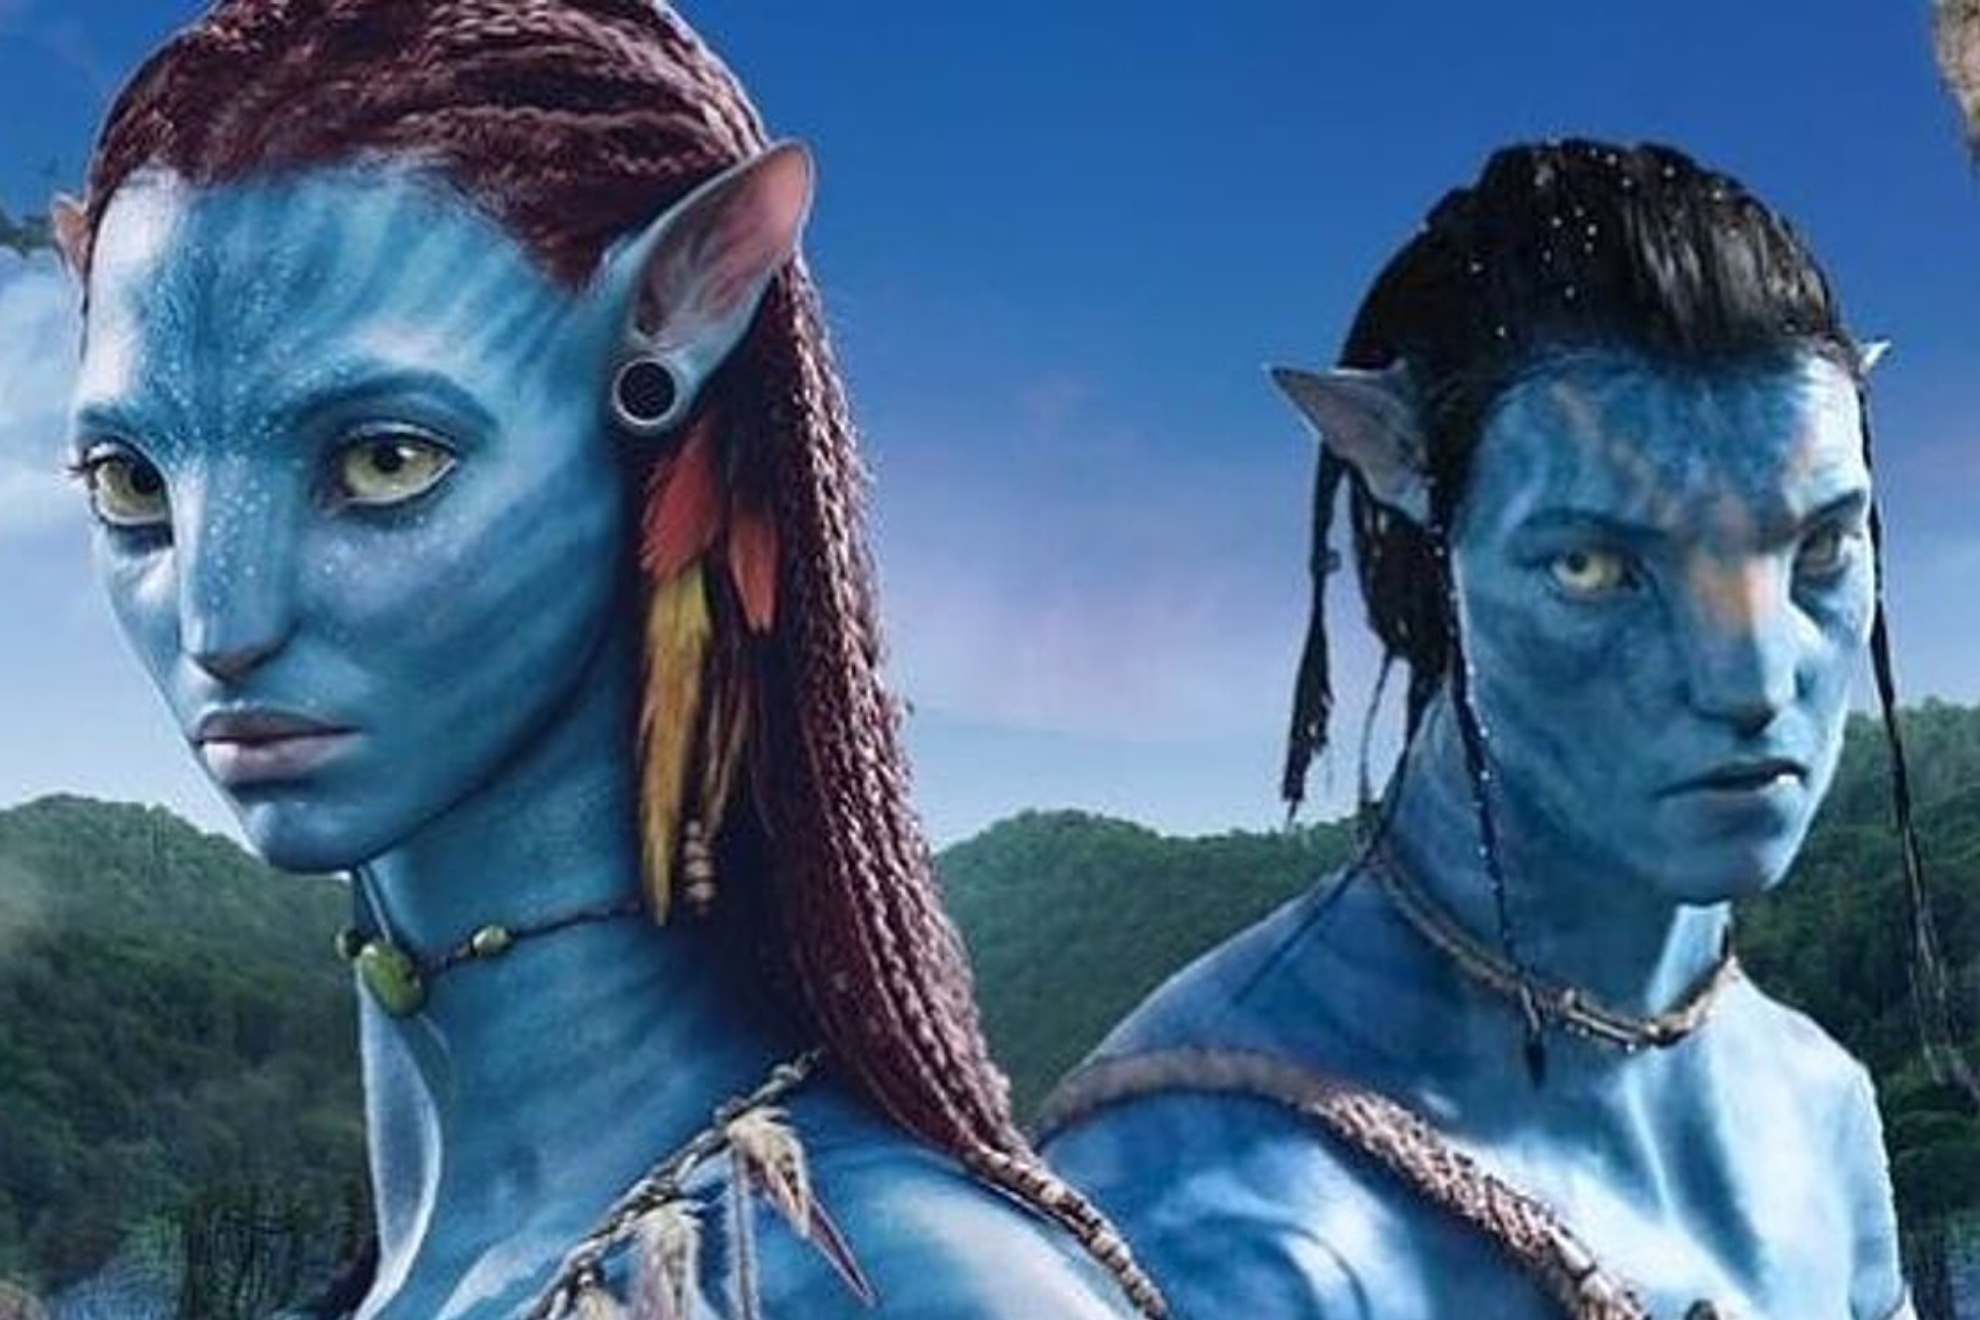 Where to Stream Avatar The Way of Water Online  Avatar 2 Release Date  on Disney Plus